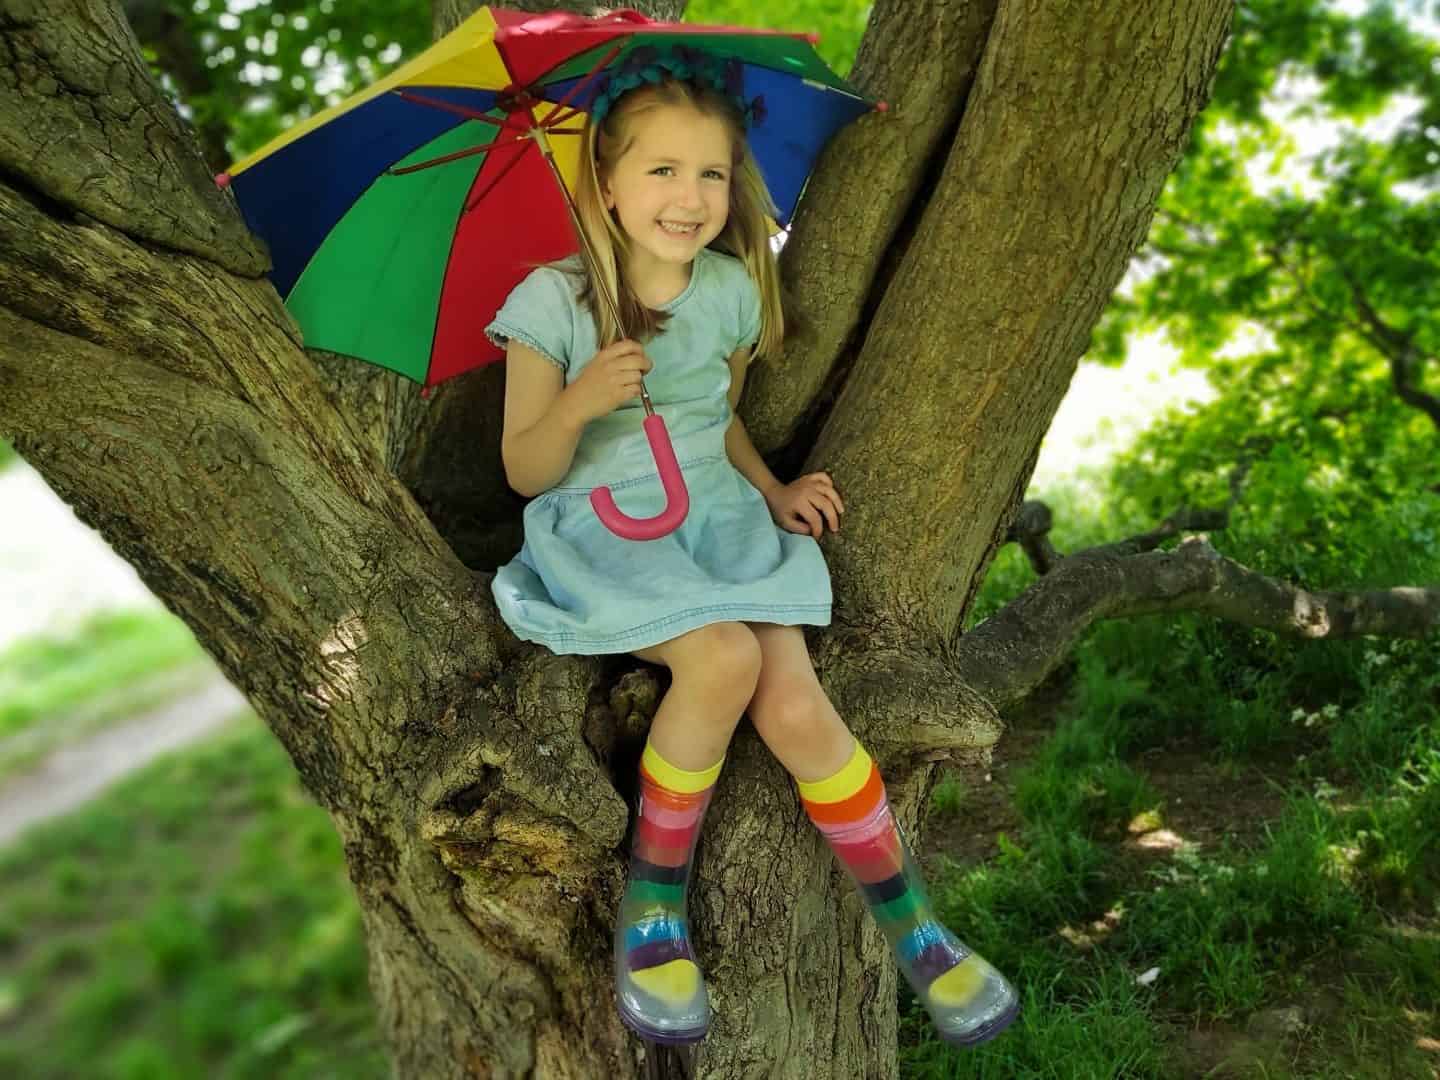 Little girl with rainbow umbrella sitting in a tree smiling and wearing squelch wellies and rainbow socks